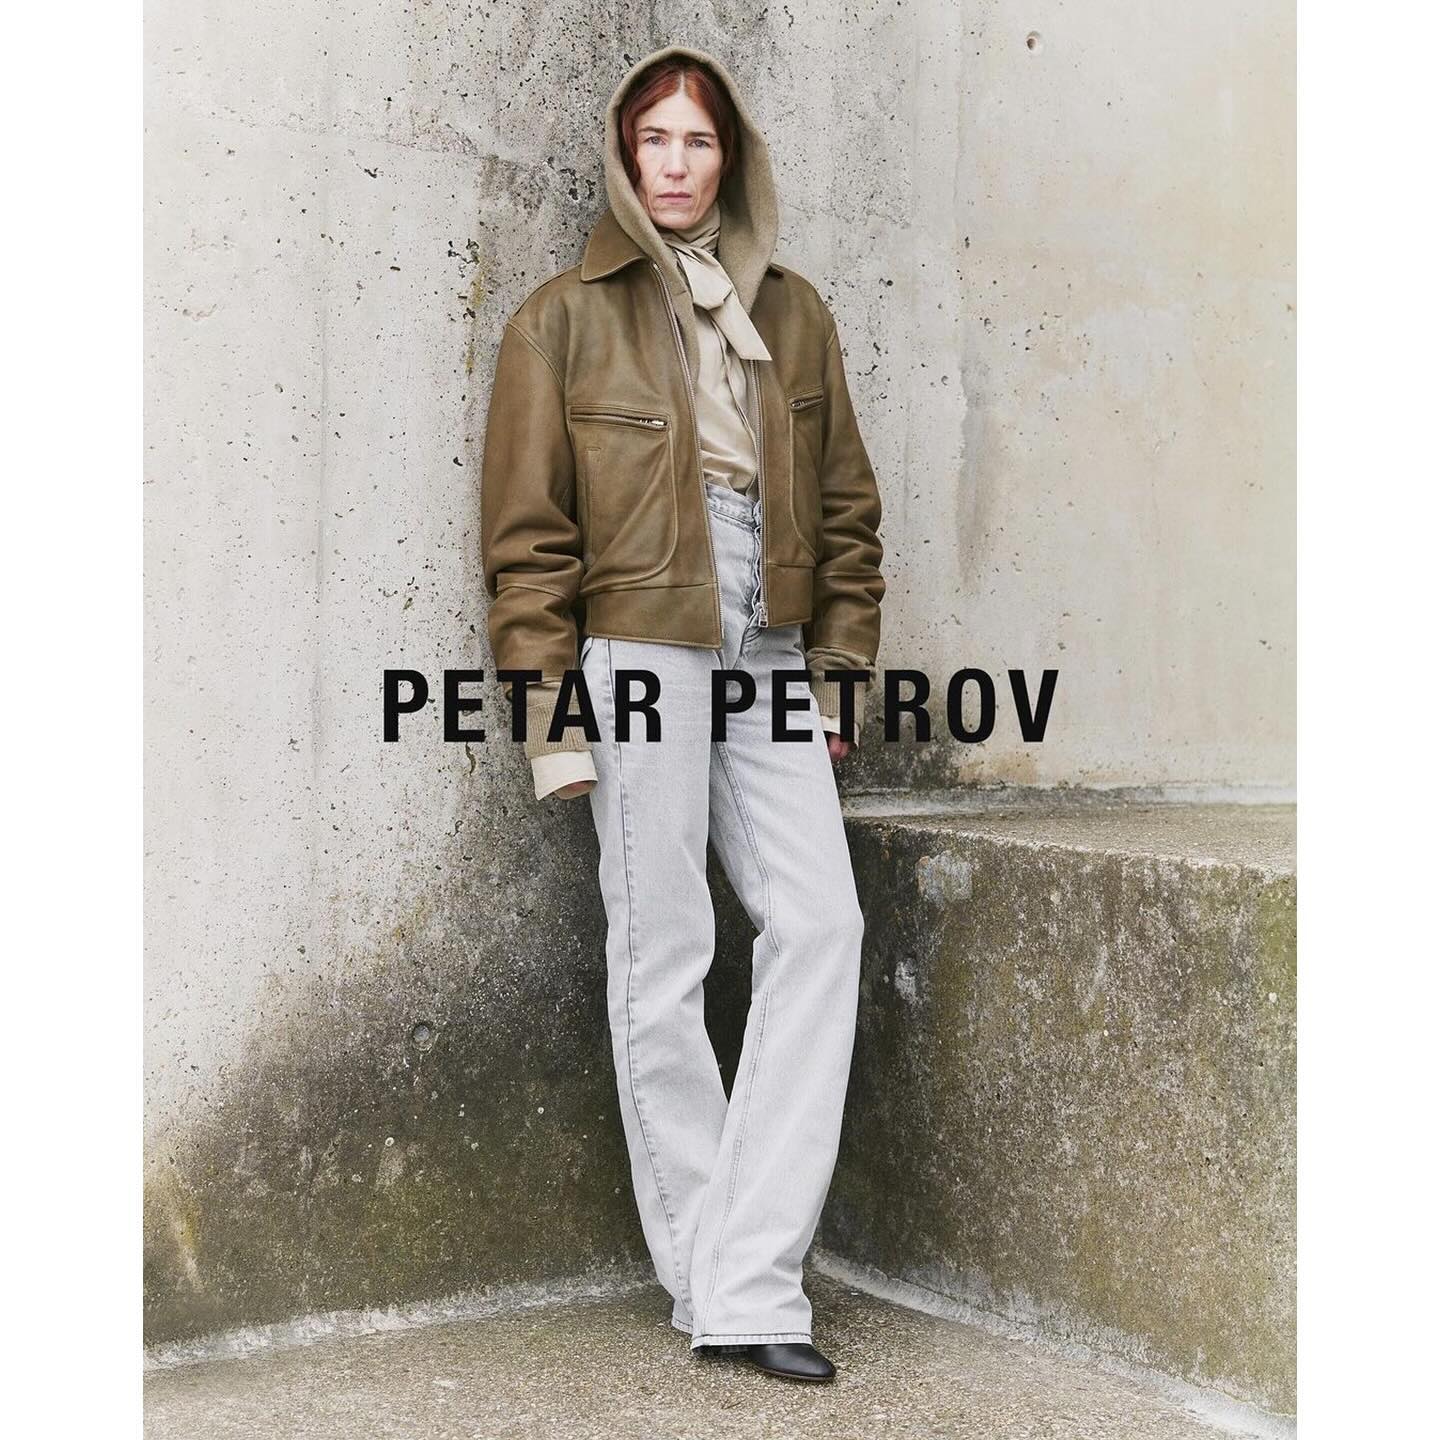 Elodie (@elodie.badet ) and Patricia (@patiroseee ) for Petar Petrov FW24. Photography by Ola Rindal, styling by Sabina Schreder, casting by Midland.